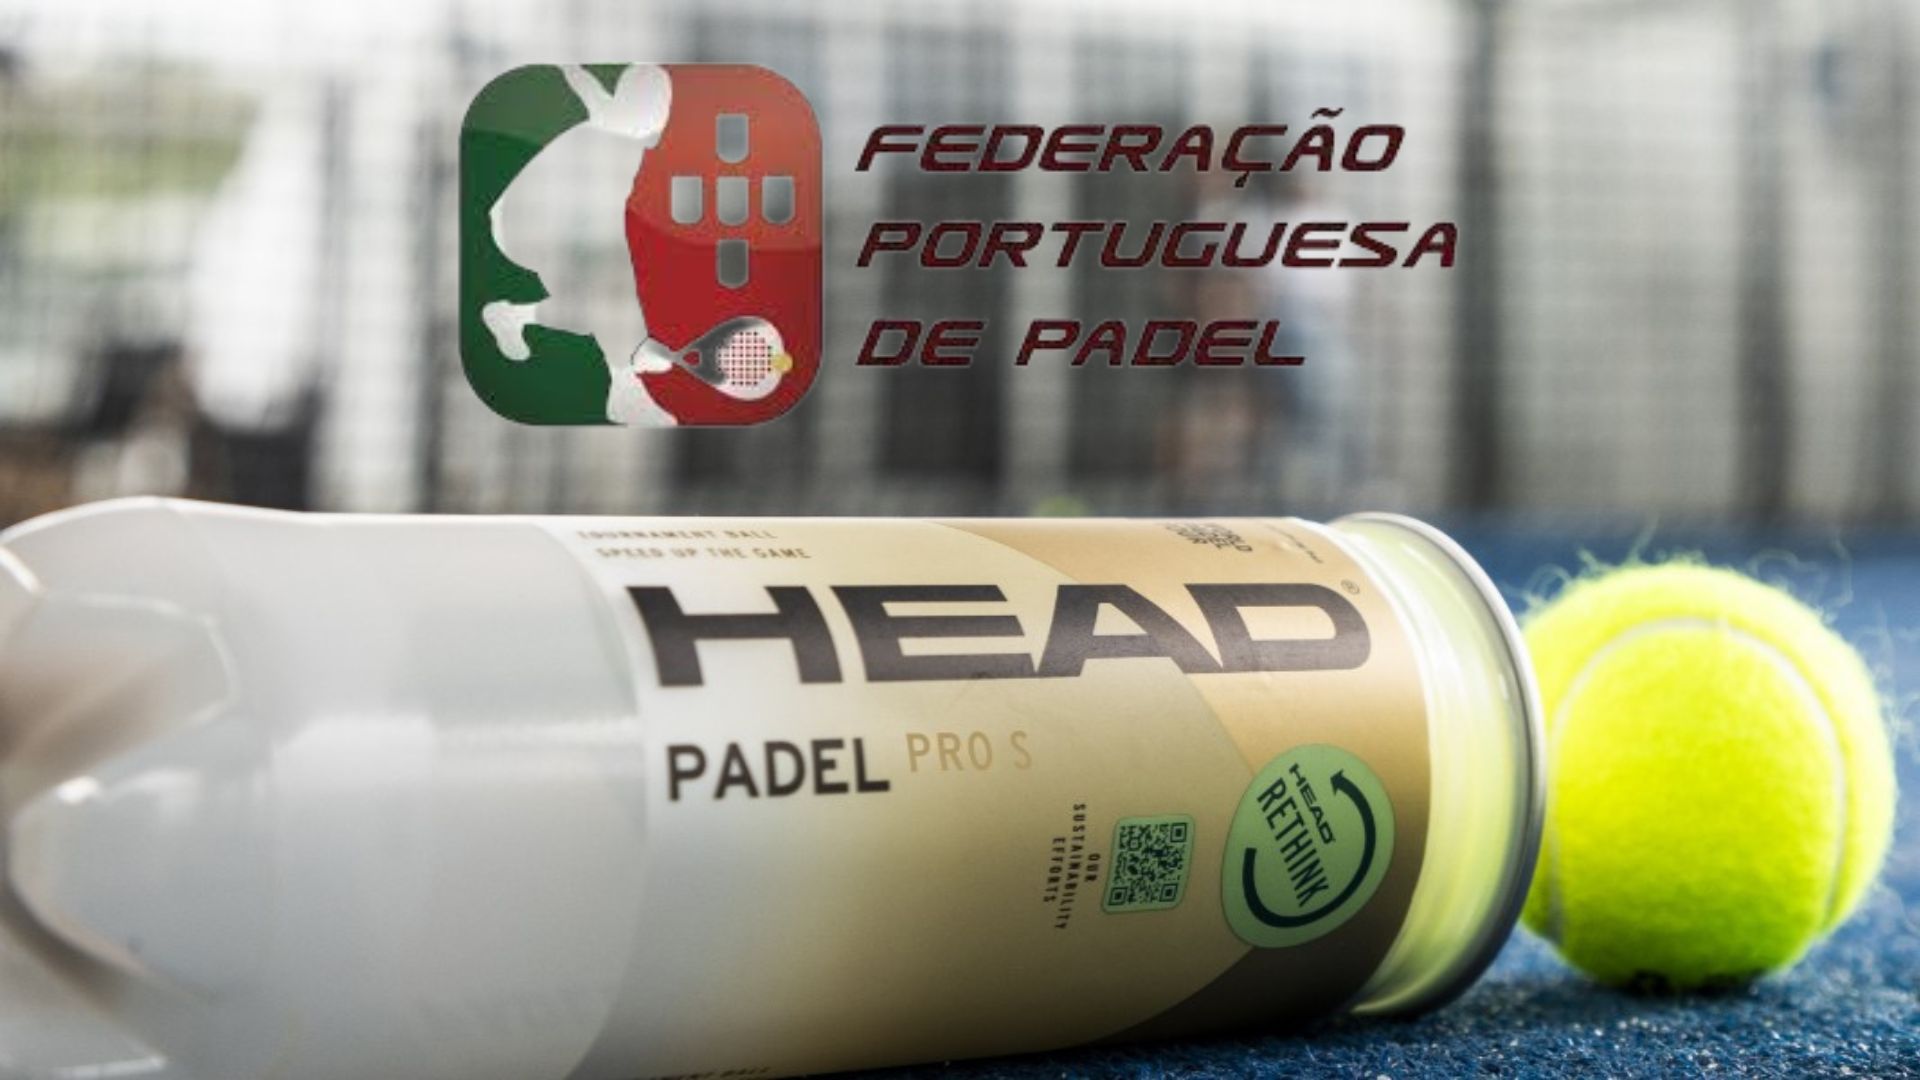 Head renews its contract with the Portuguese Football Federation padel, with something new!